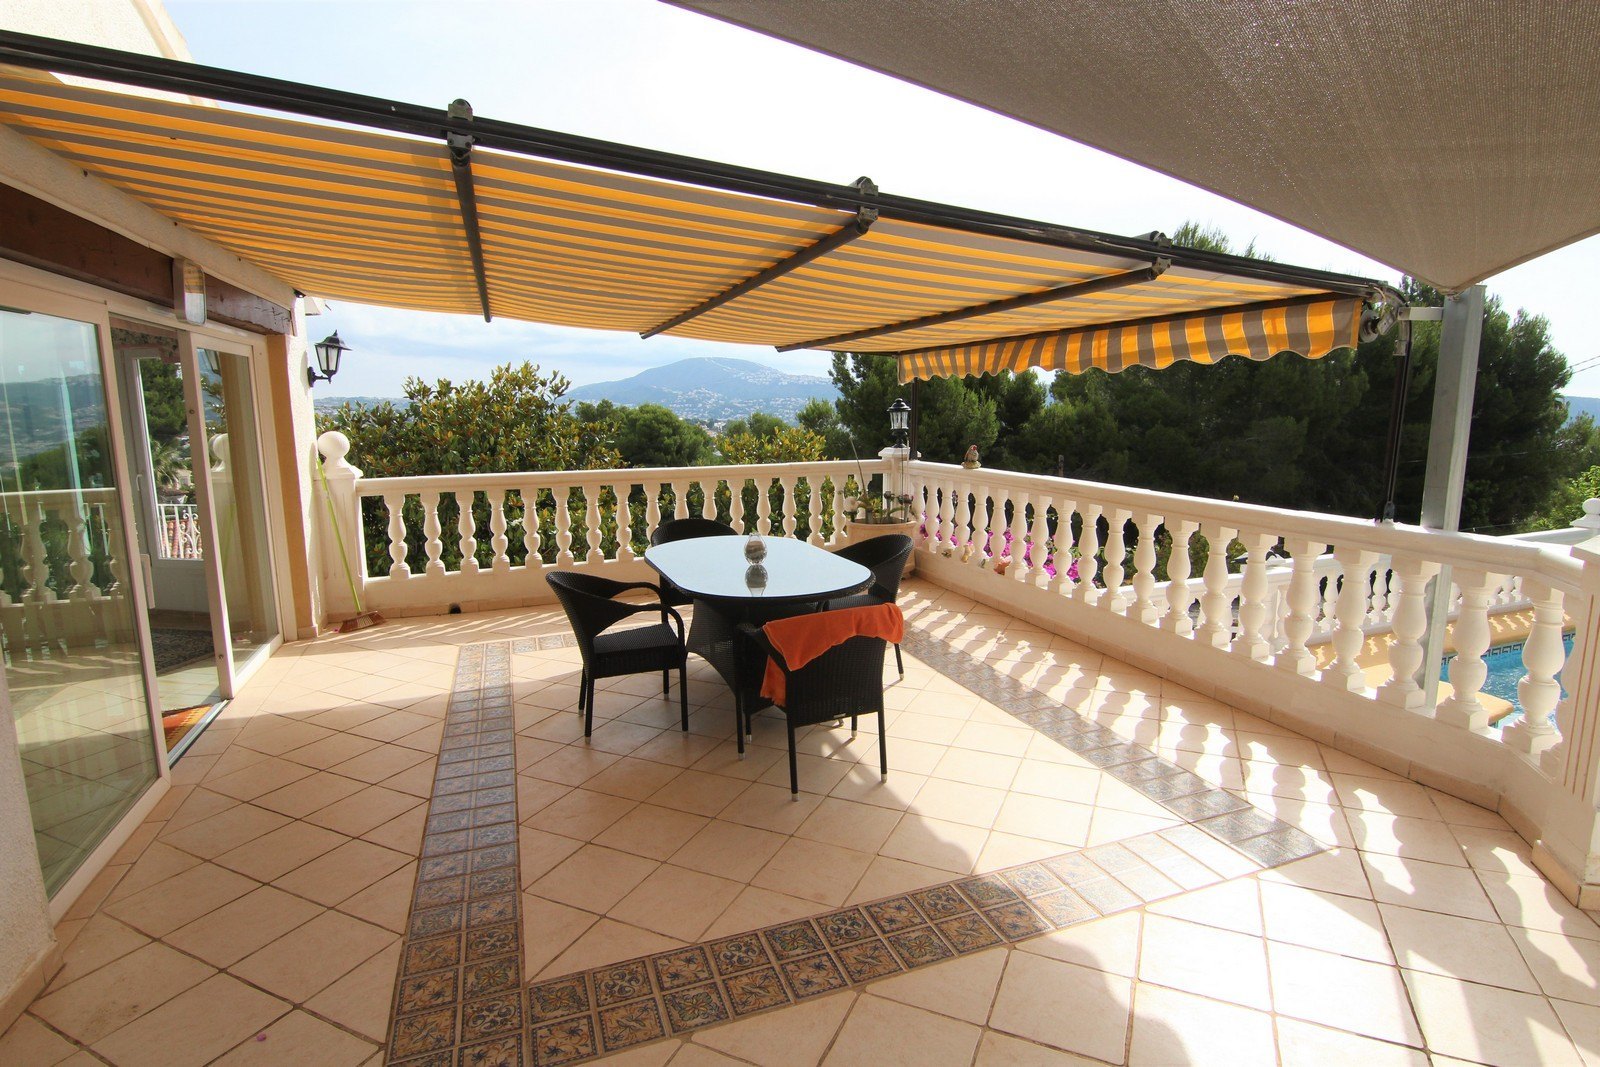 Villa for sale with two apartments and pool in Moraira.